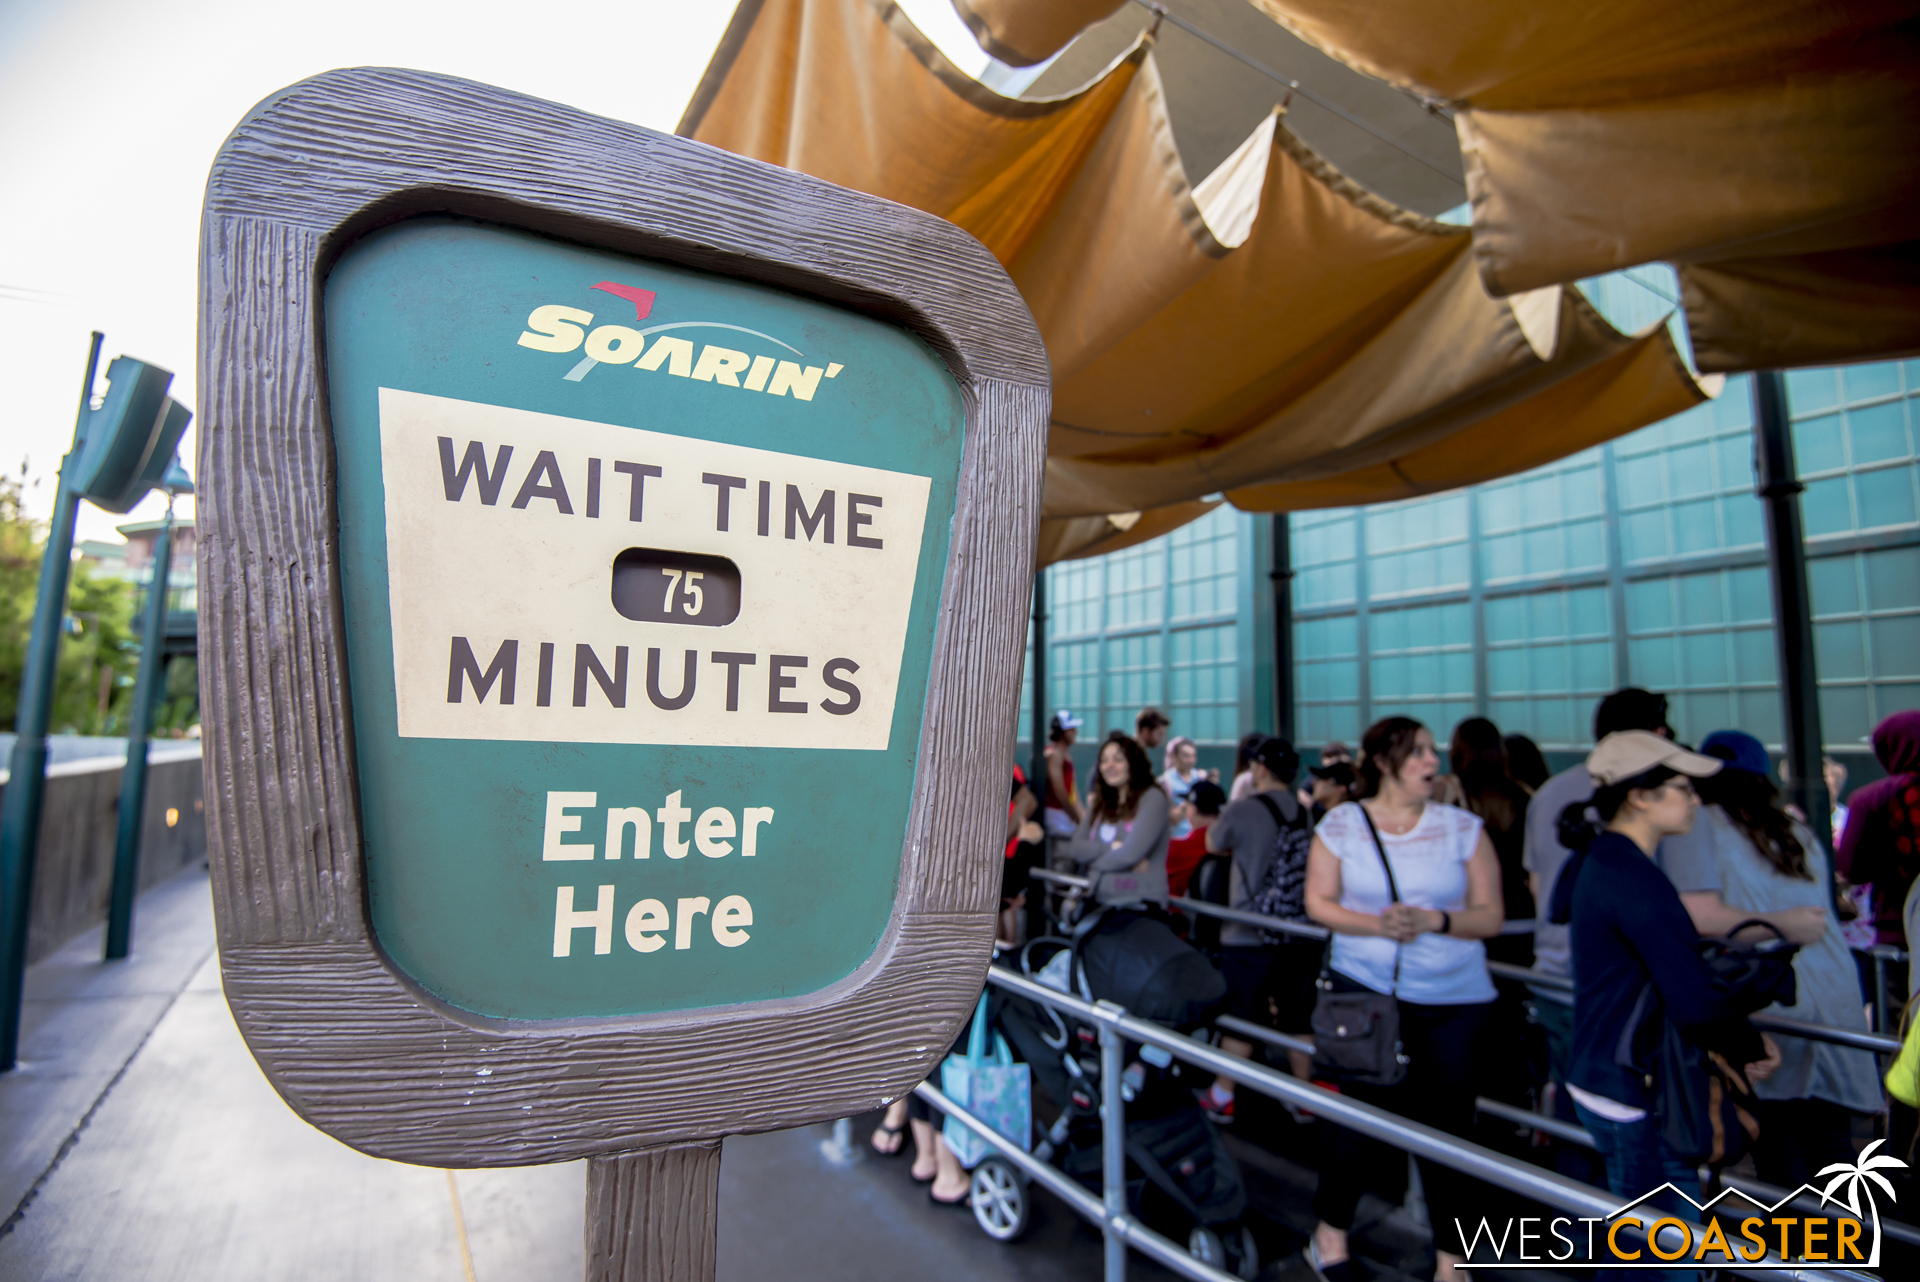  75 minutes may be a long time, but it's far better than the 4 hours Shanghai Disneyland guests are waiting for their exact same ride (though their queue is far more visually spectacular).&nbsp; For the time being, the single rider line has also been